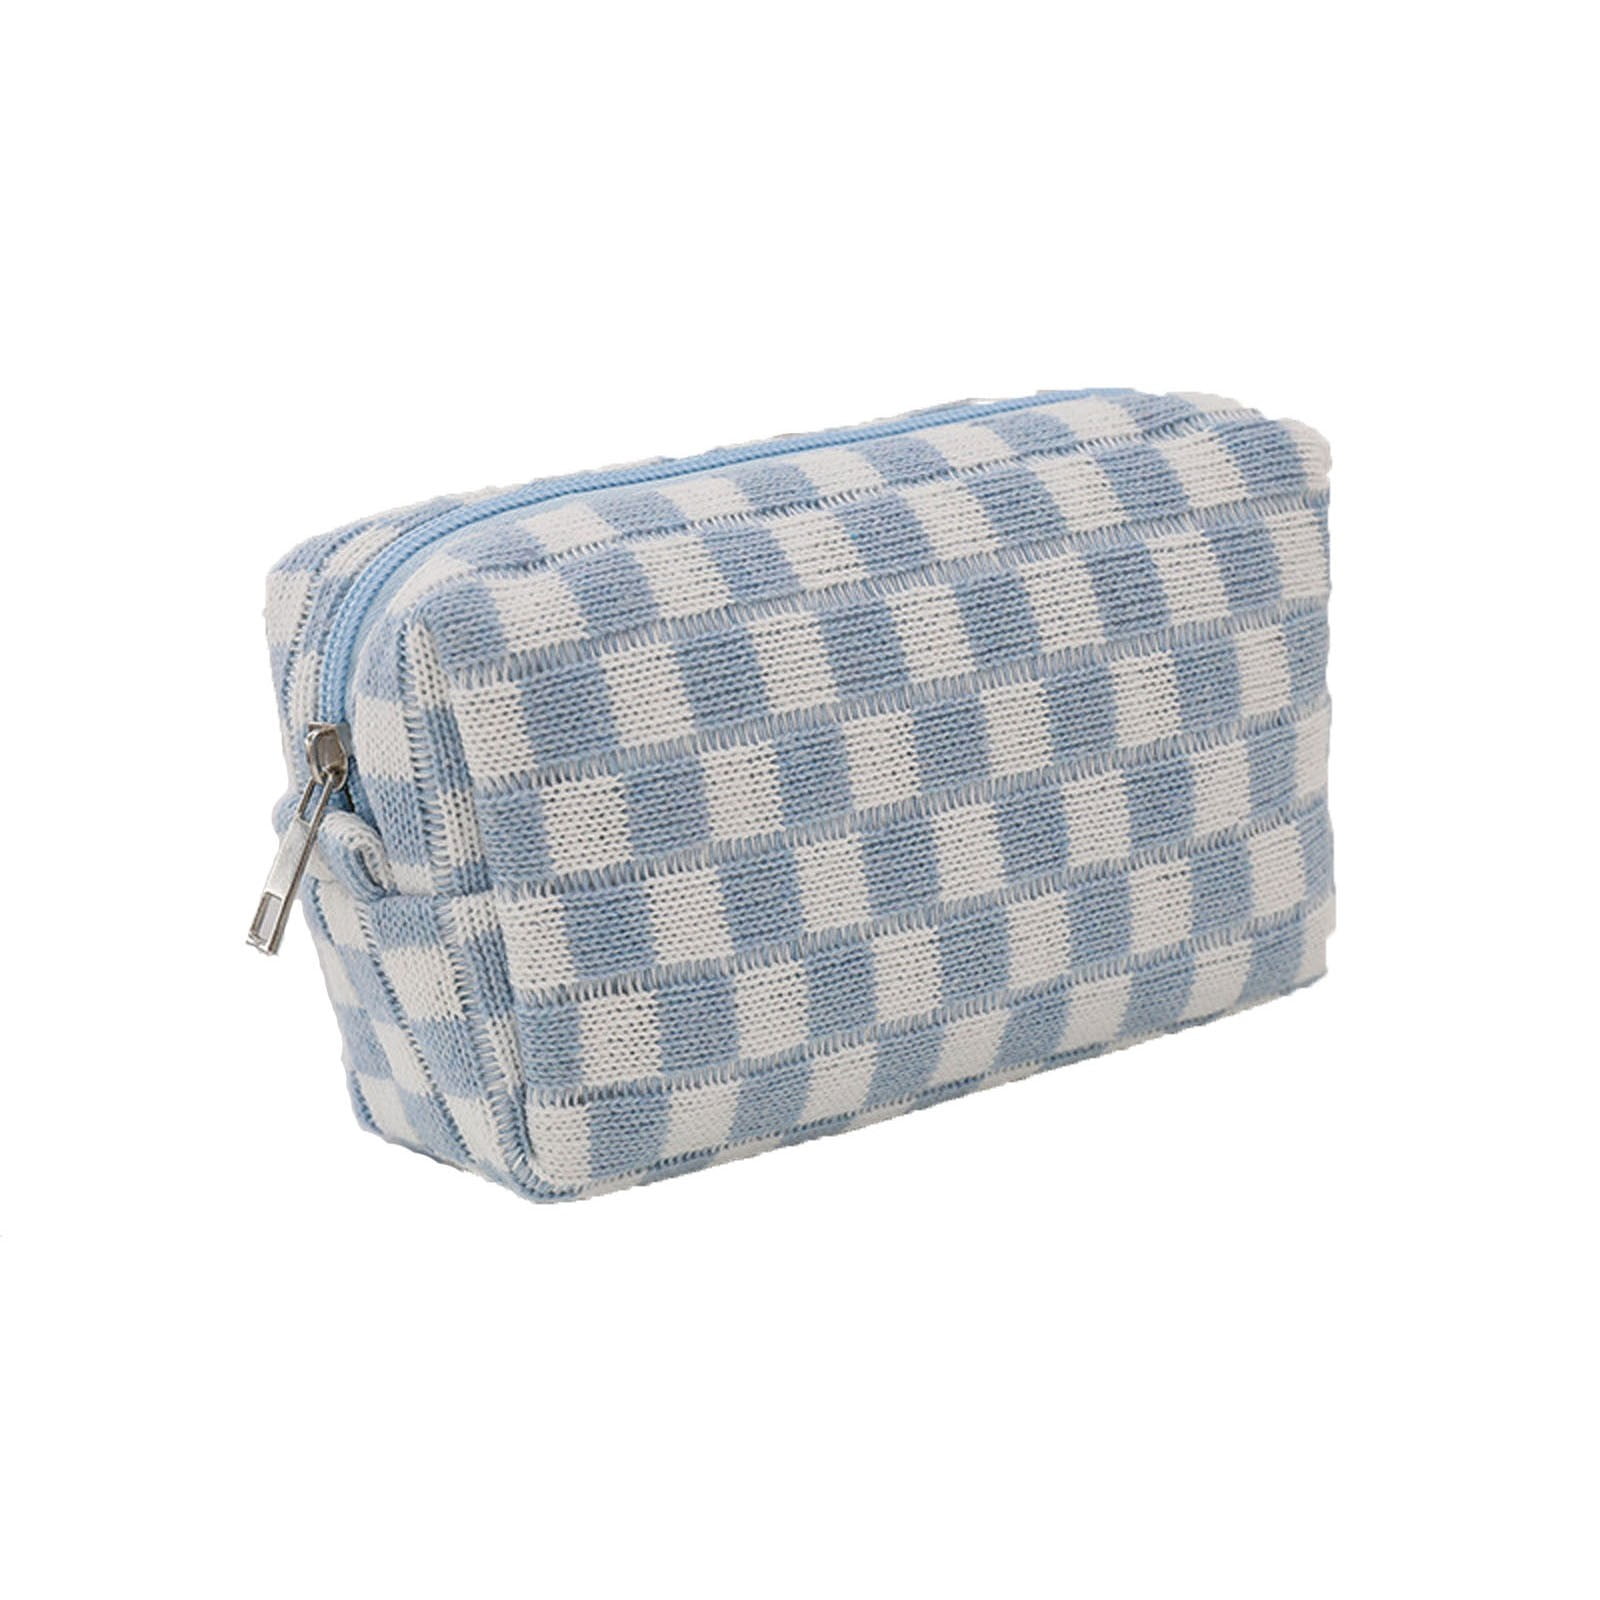  LOLDREAM Portable Checkered Makeup Bags,Large Capacity Travel  Cosmetic Bag,Large Open Lay Flat Makeup Bag Organizer,PU Leather Waterproof  Toiletry Bag : Beauty & Personal Care